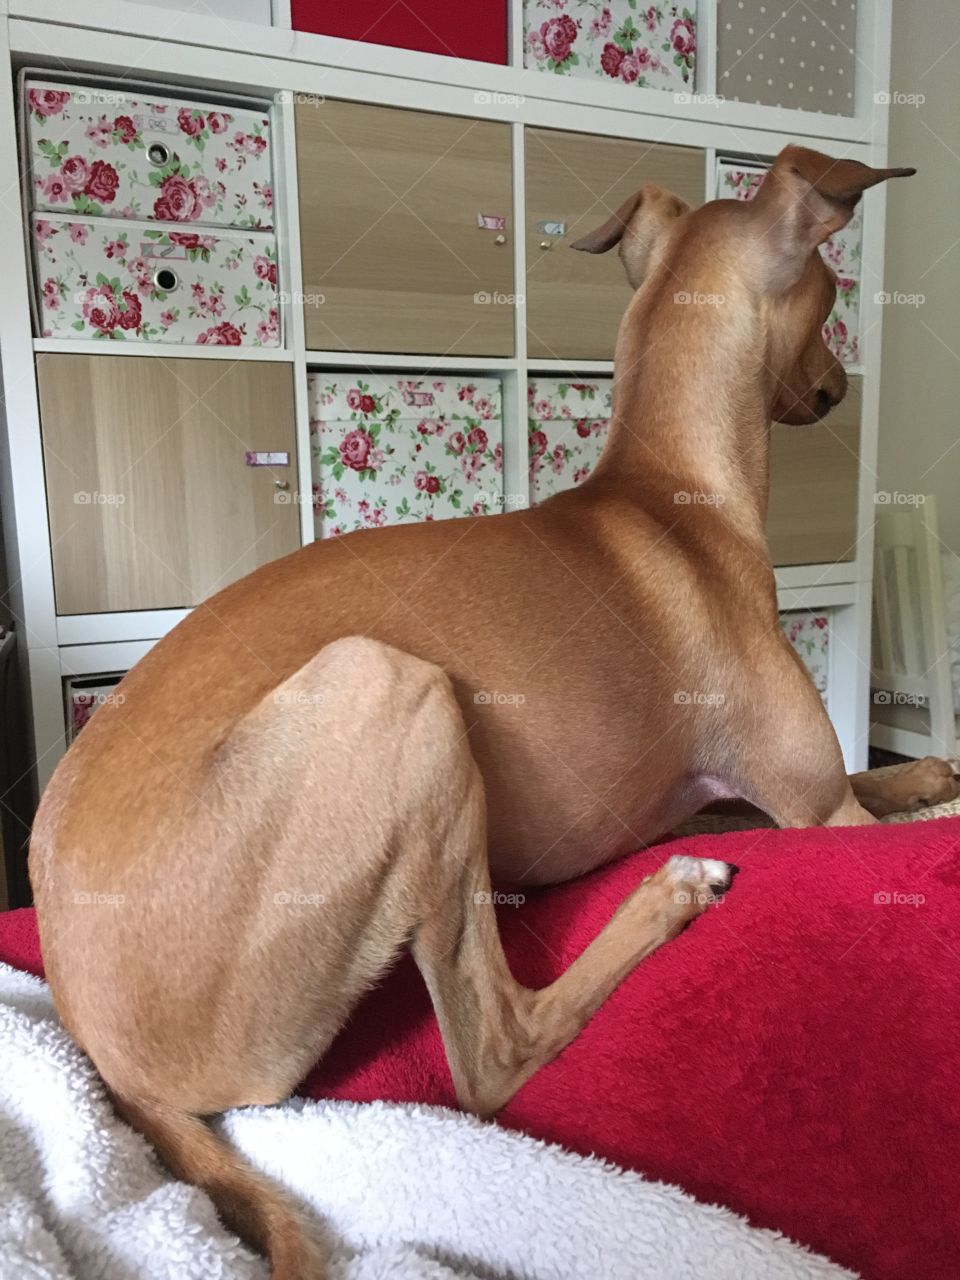 Amber the Italian greyhound puppy sat on a red blanket on the back of the sofa looking away, alert 